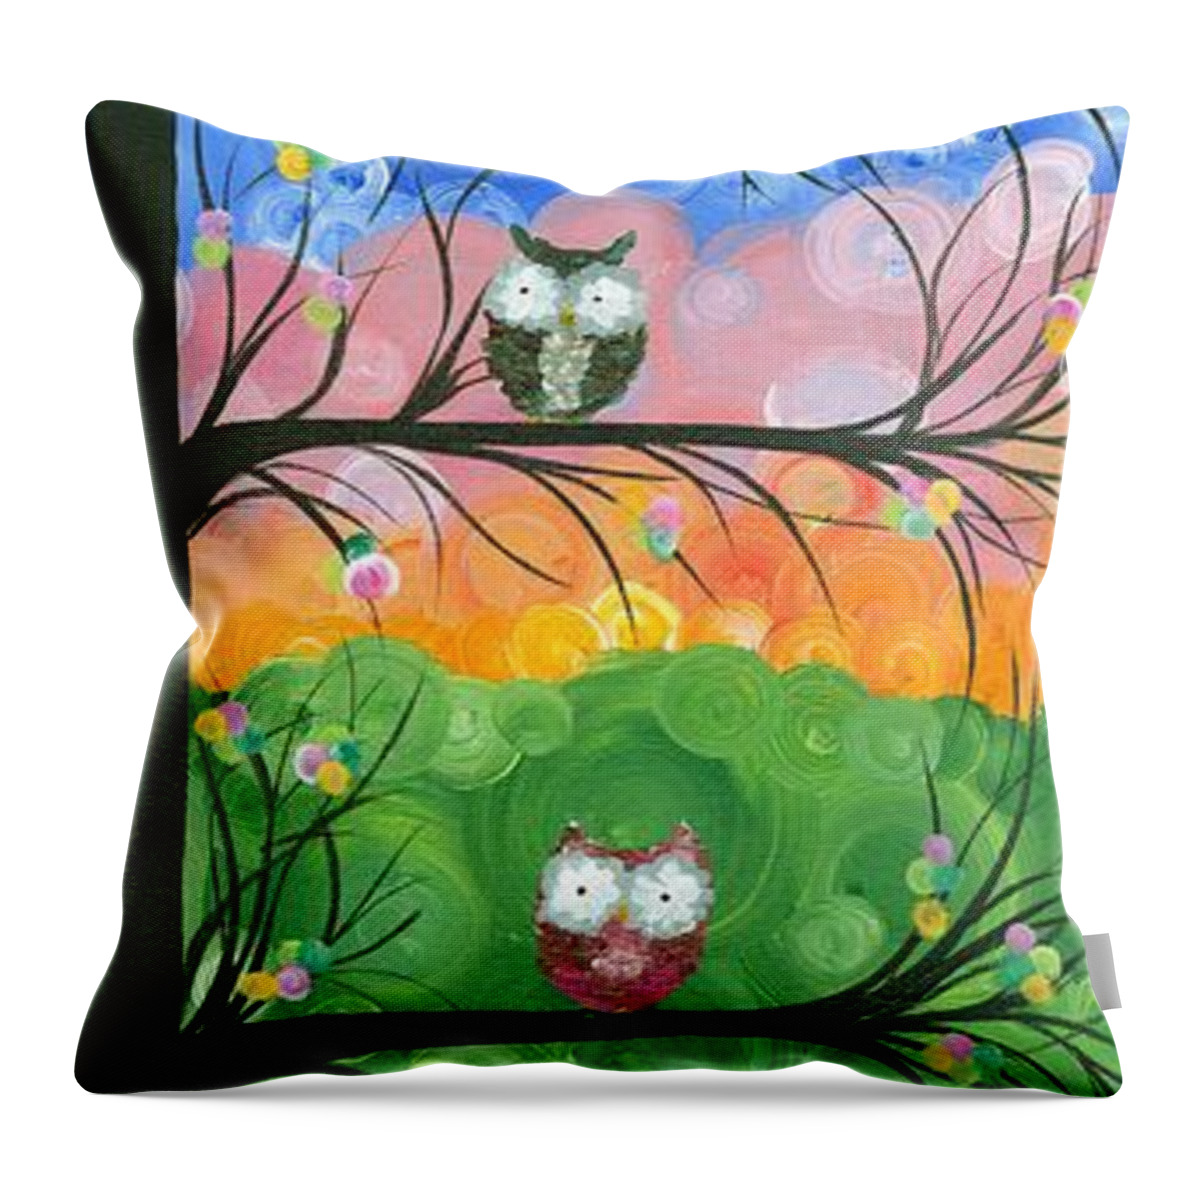 Owls Throw Pillow featuring the painting Hoolandia Family Tree 02 by MiMi Stirn